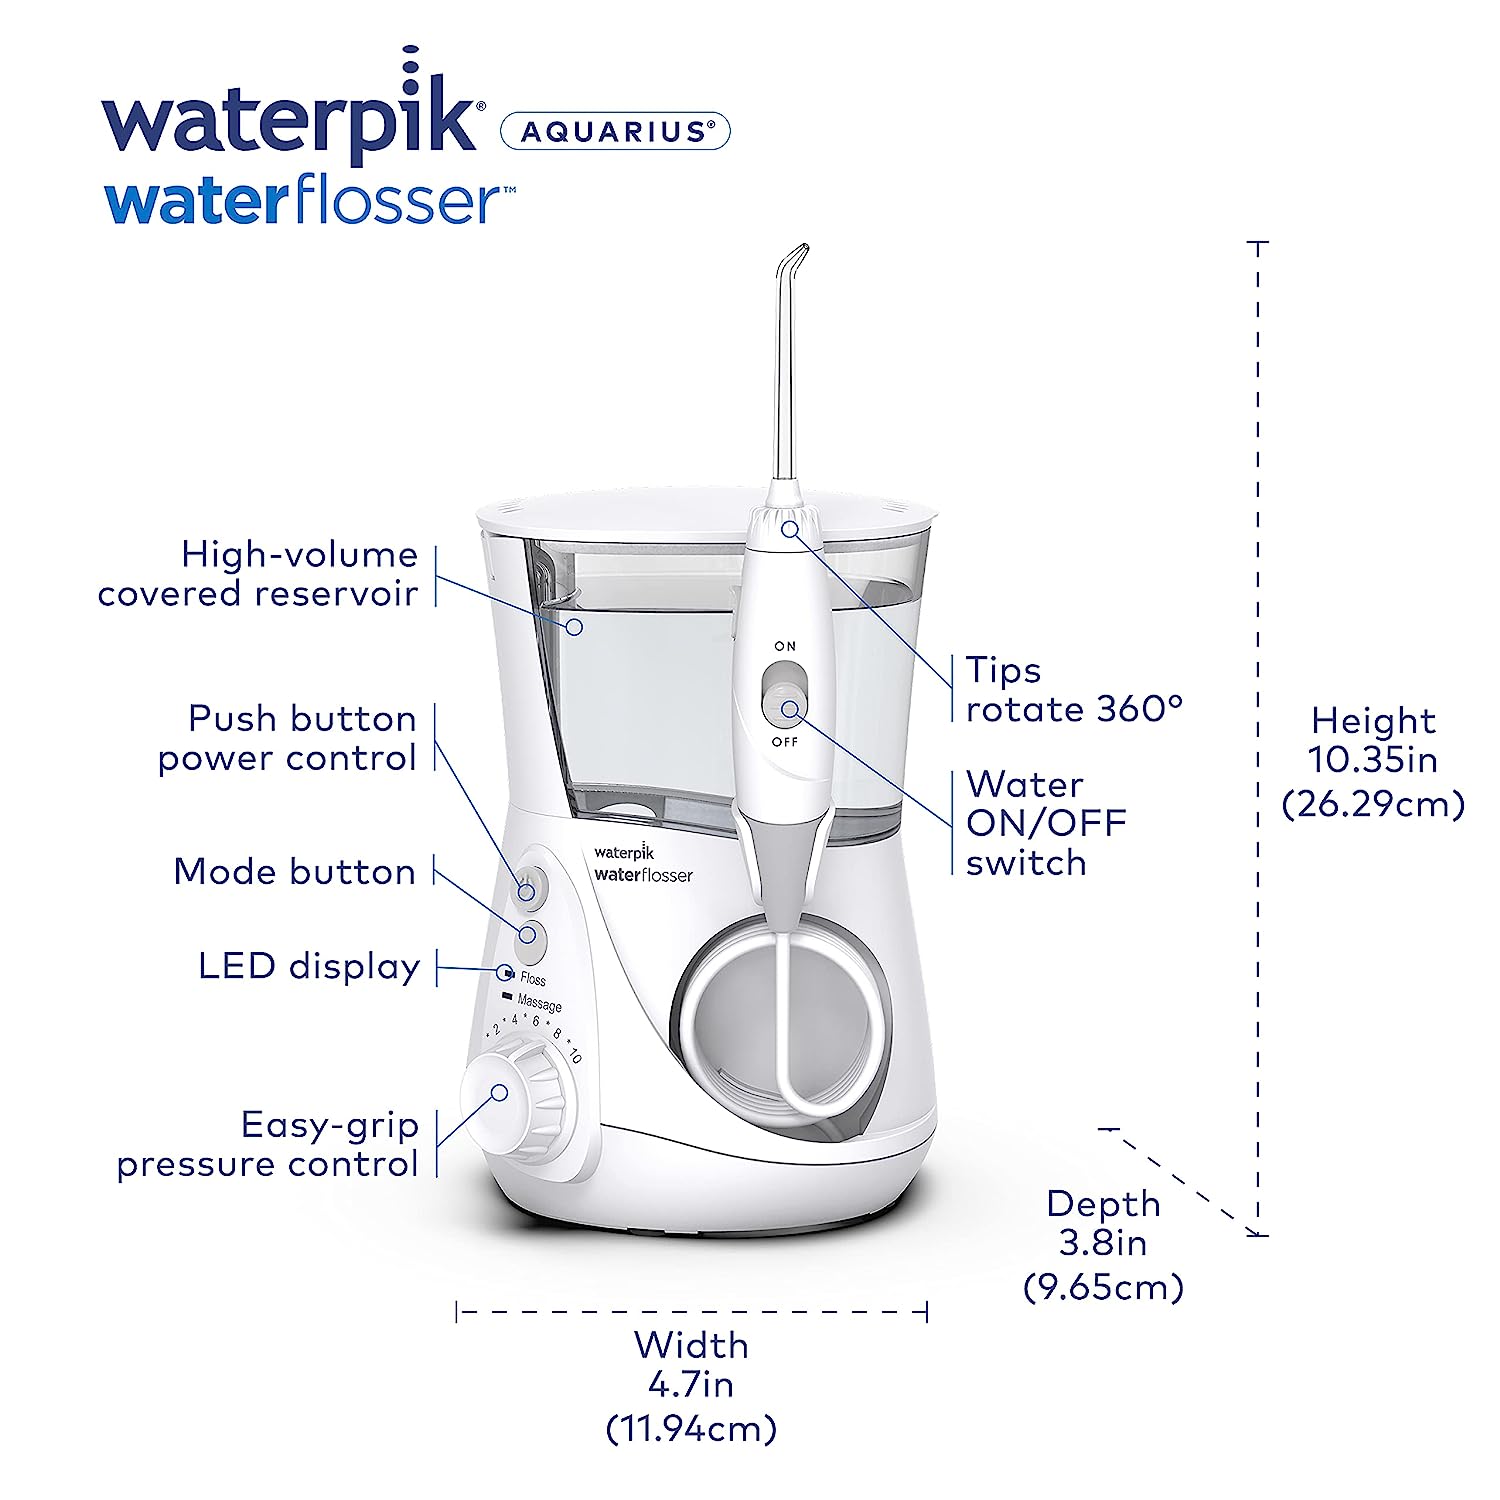 Waterpik Aquarius Water Flosser Professional For Teeth, Gums, Braces, Dental Care, Electric Power With 10 Settings, 7 Tips For Multiple Users And Needs, ADA Accepted, White WP-660